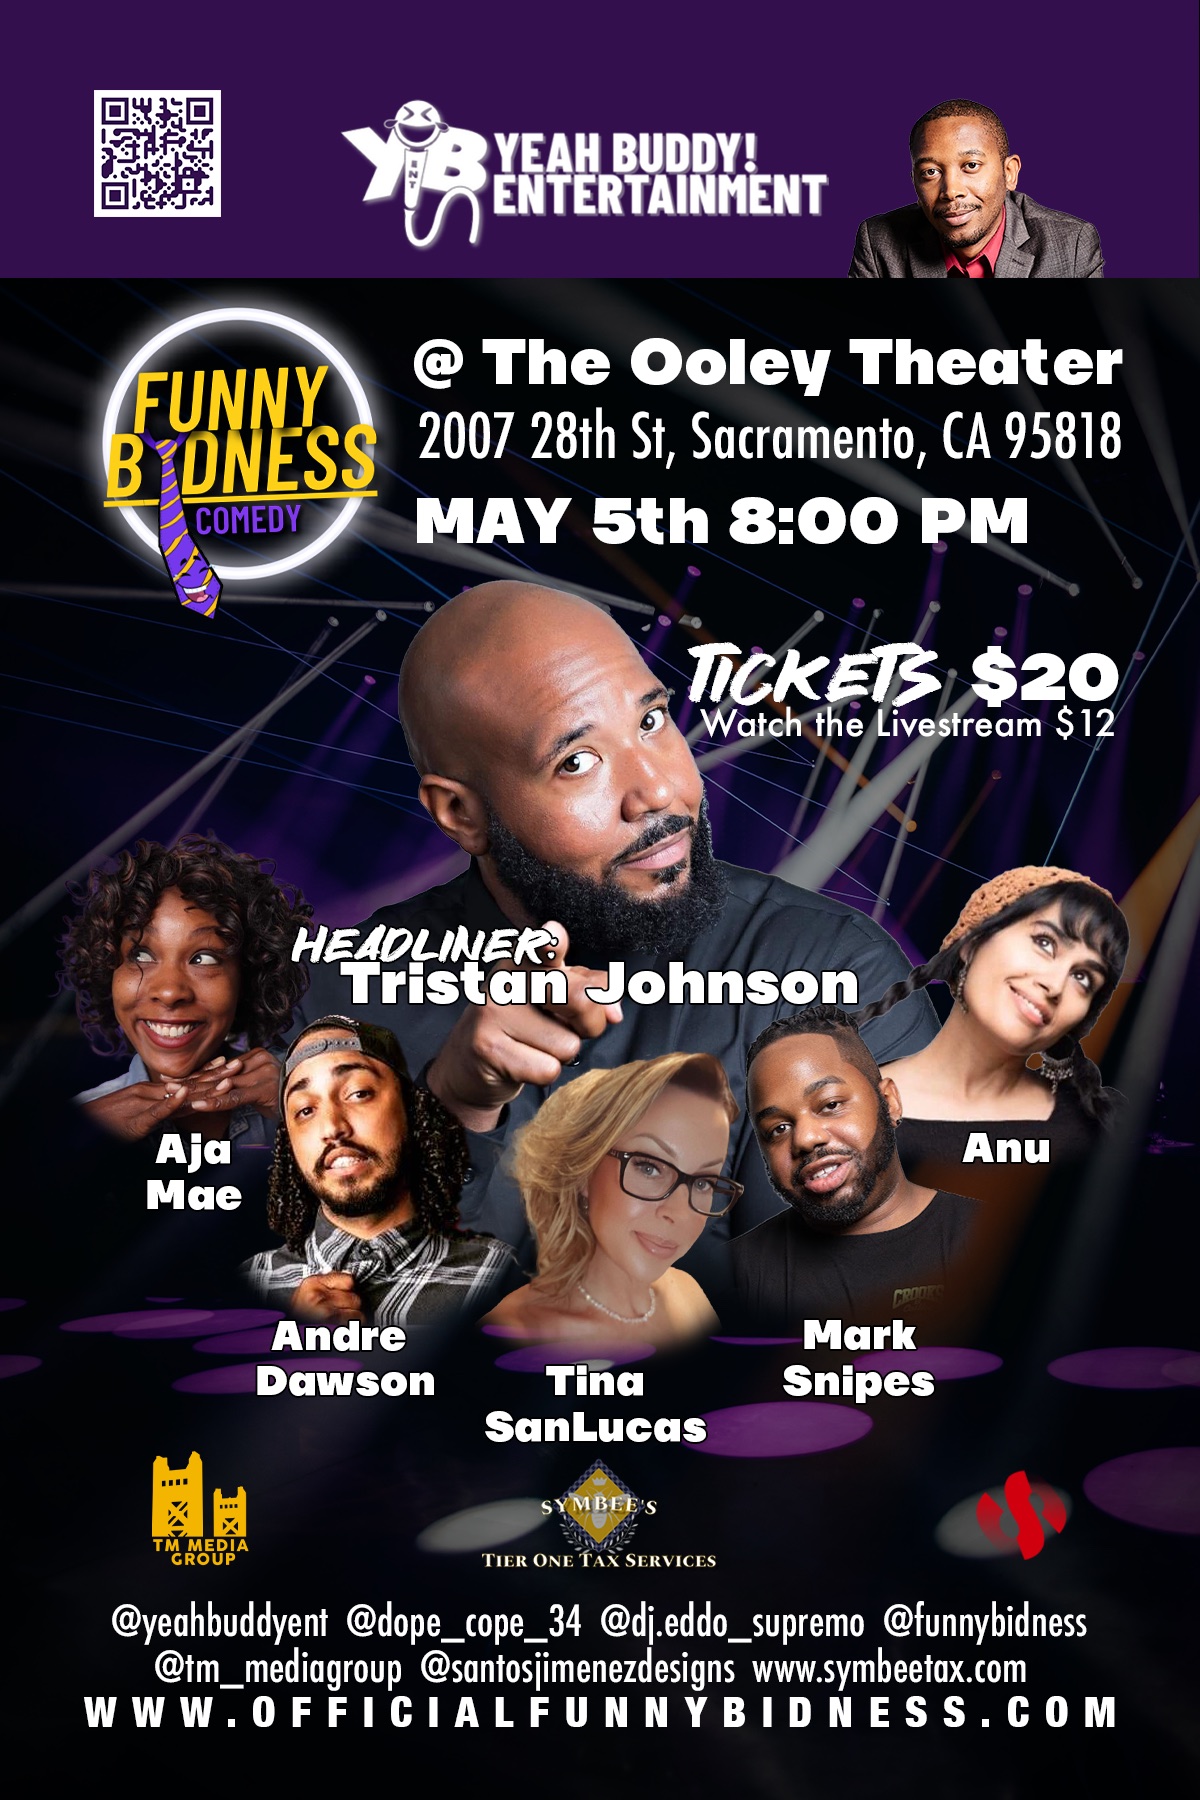 Ooley Theater – May 5th